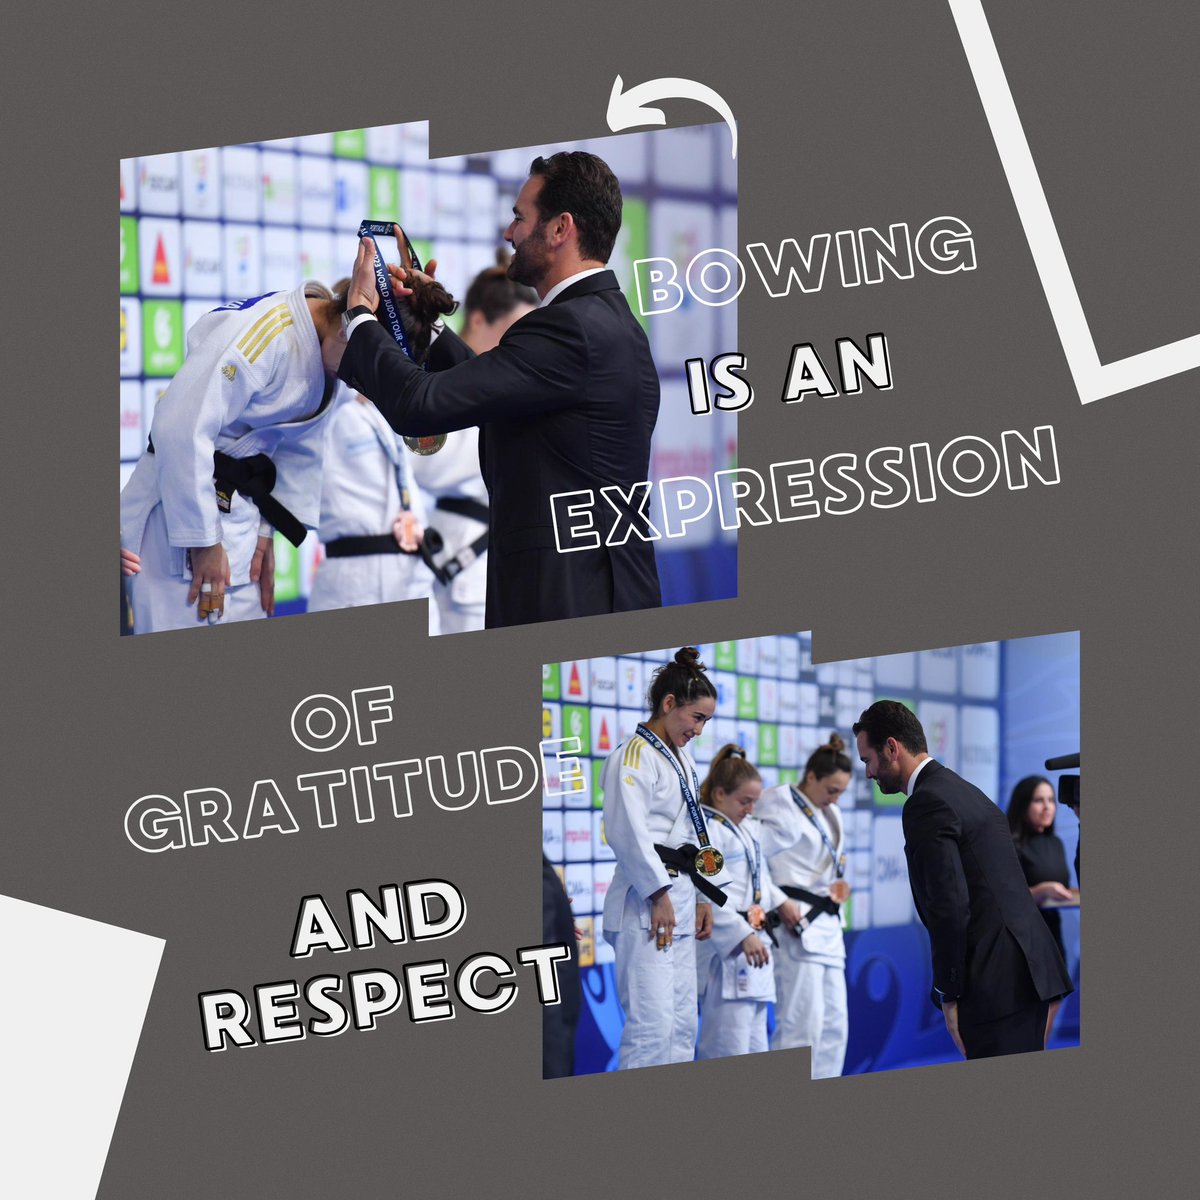 Bowing is an expression of gratitude and respect. 🥋 🤝🏻

#Judo #JudoPortugal #Portugal #Sport #RoadtoParis2024 #Olympics #OlympicsQualifier #Respect